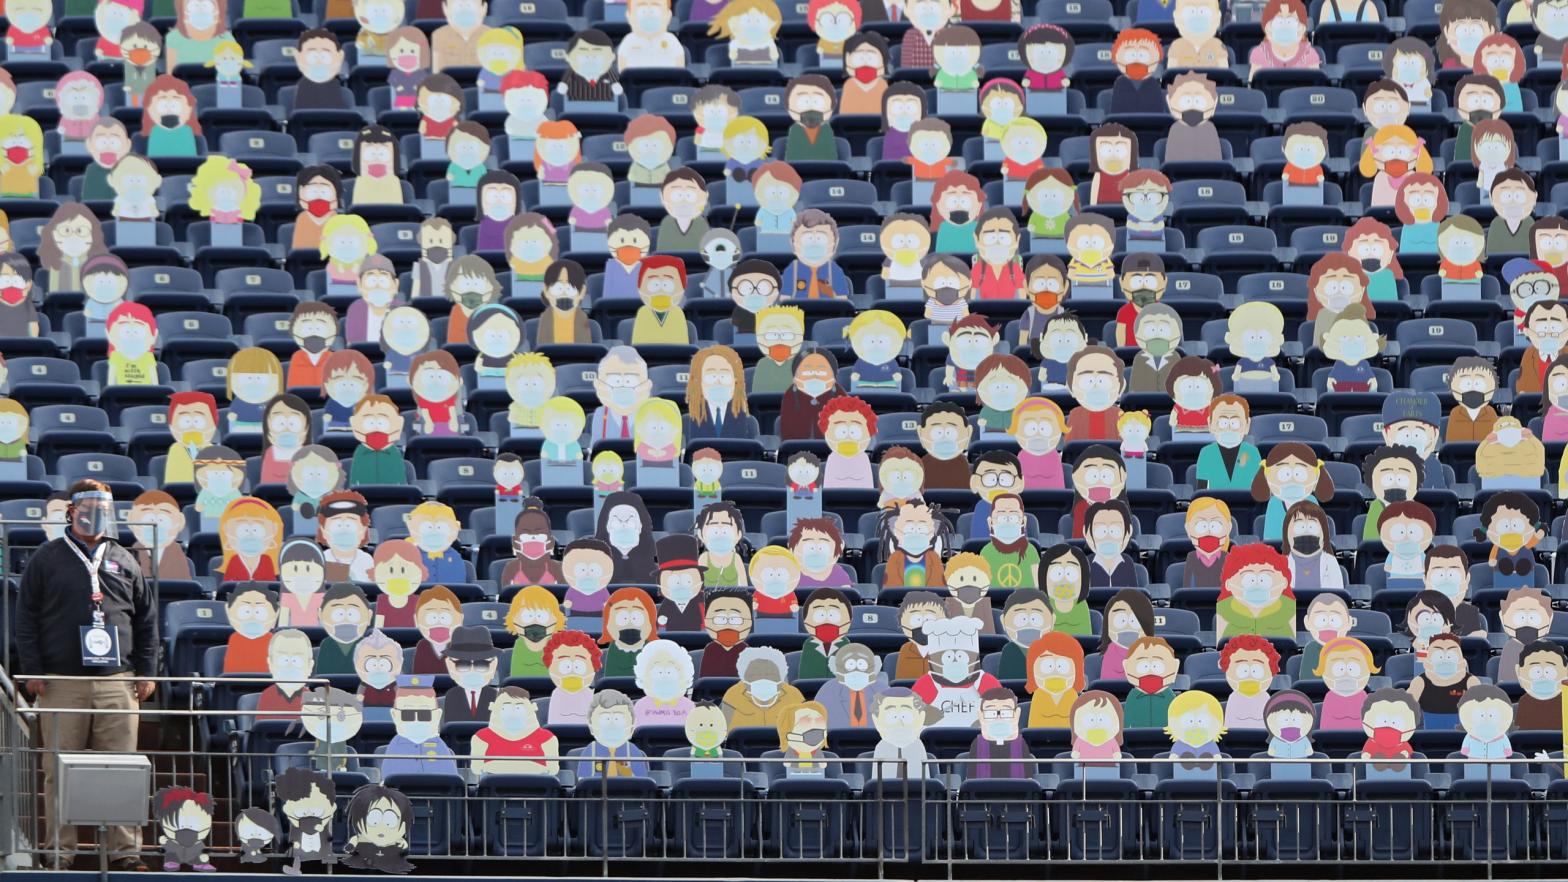 Cardboard cutouts of the television show South Park are seen in the stands as the Tampa Bay Buccaneers play against the Denver Broncos on Sept. 27, 2020 in Denver, Colorado. (Photo: Matthew Stockman, Getty Images)